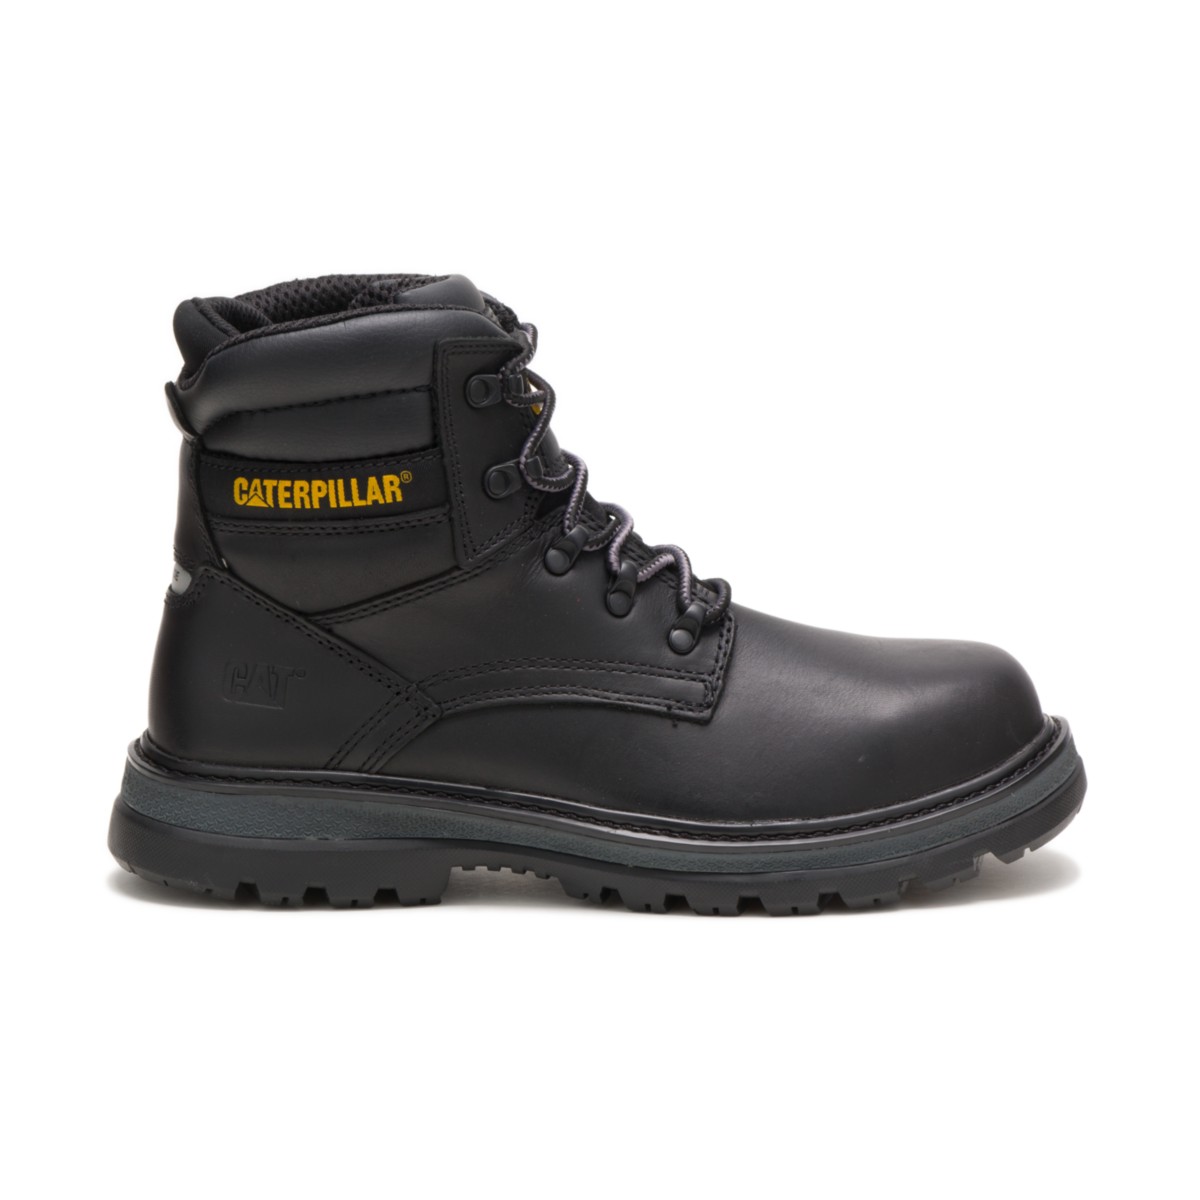 CAT Caterpillar Fairbanks Safety Boots S3 Industrial Steel Toe Mens Work Shoes 